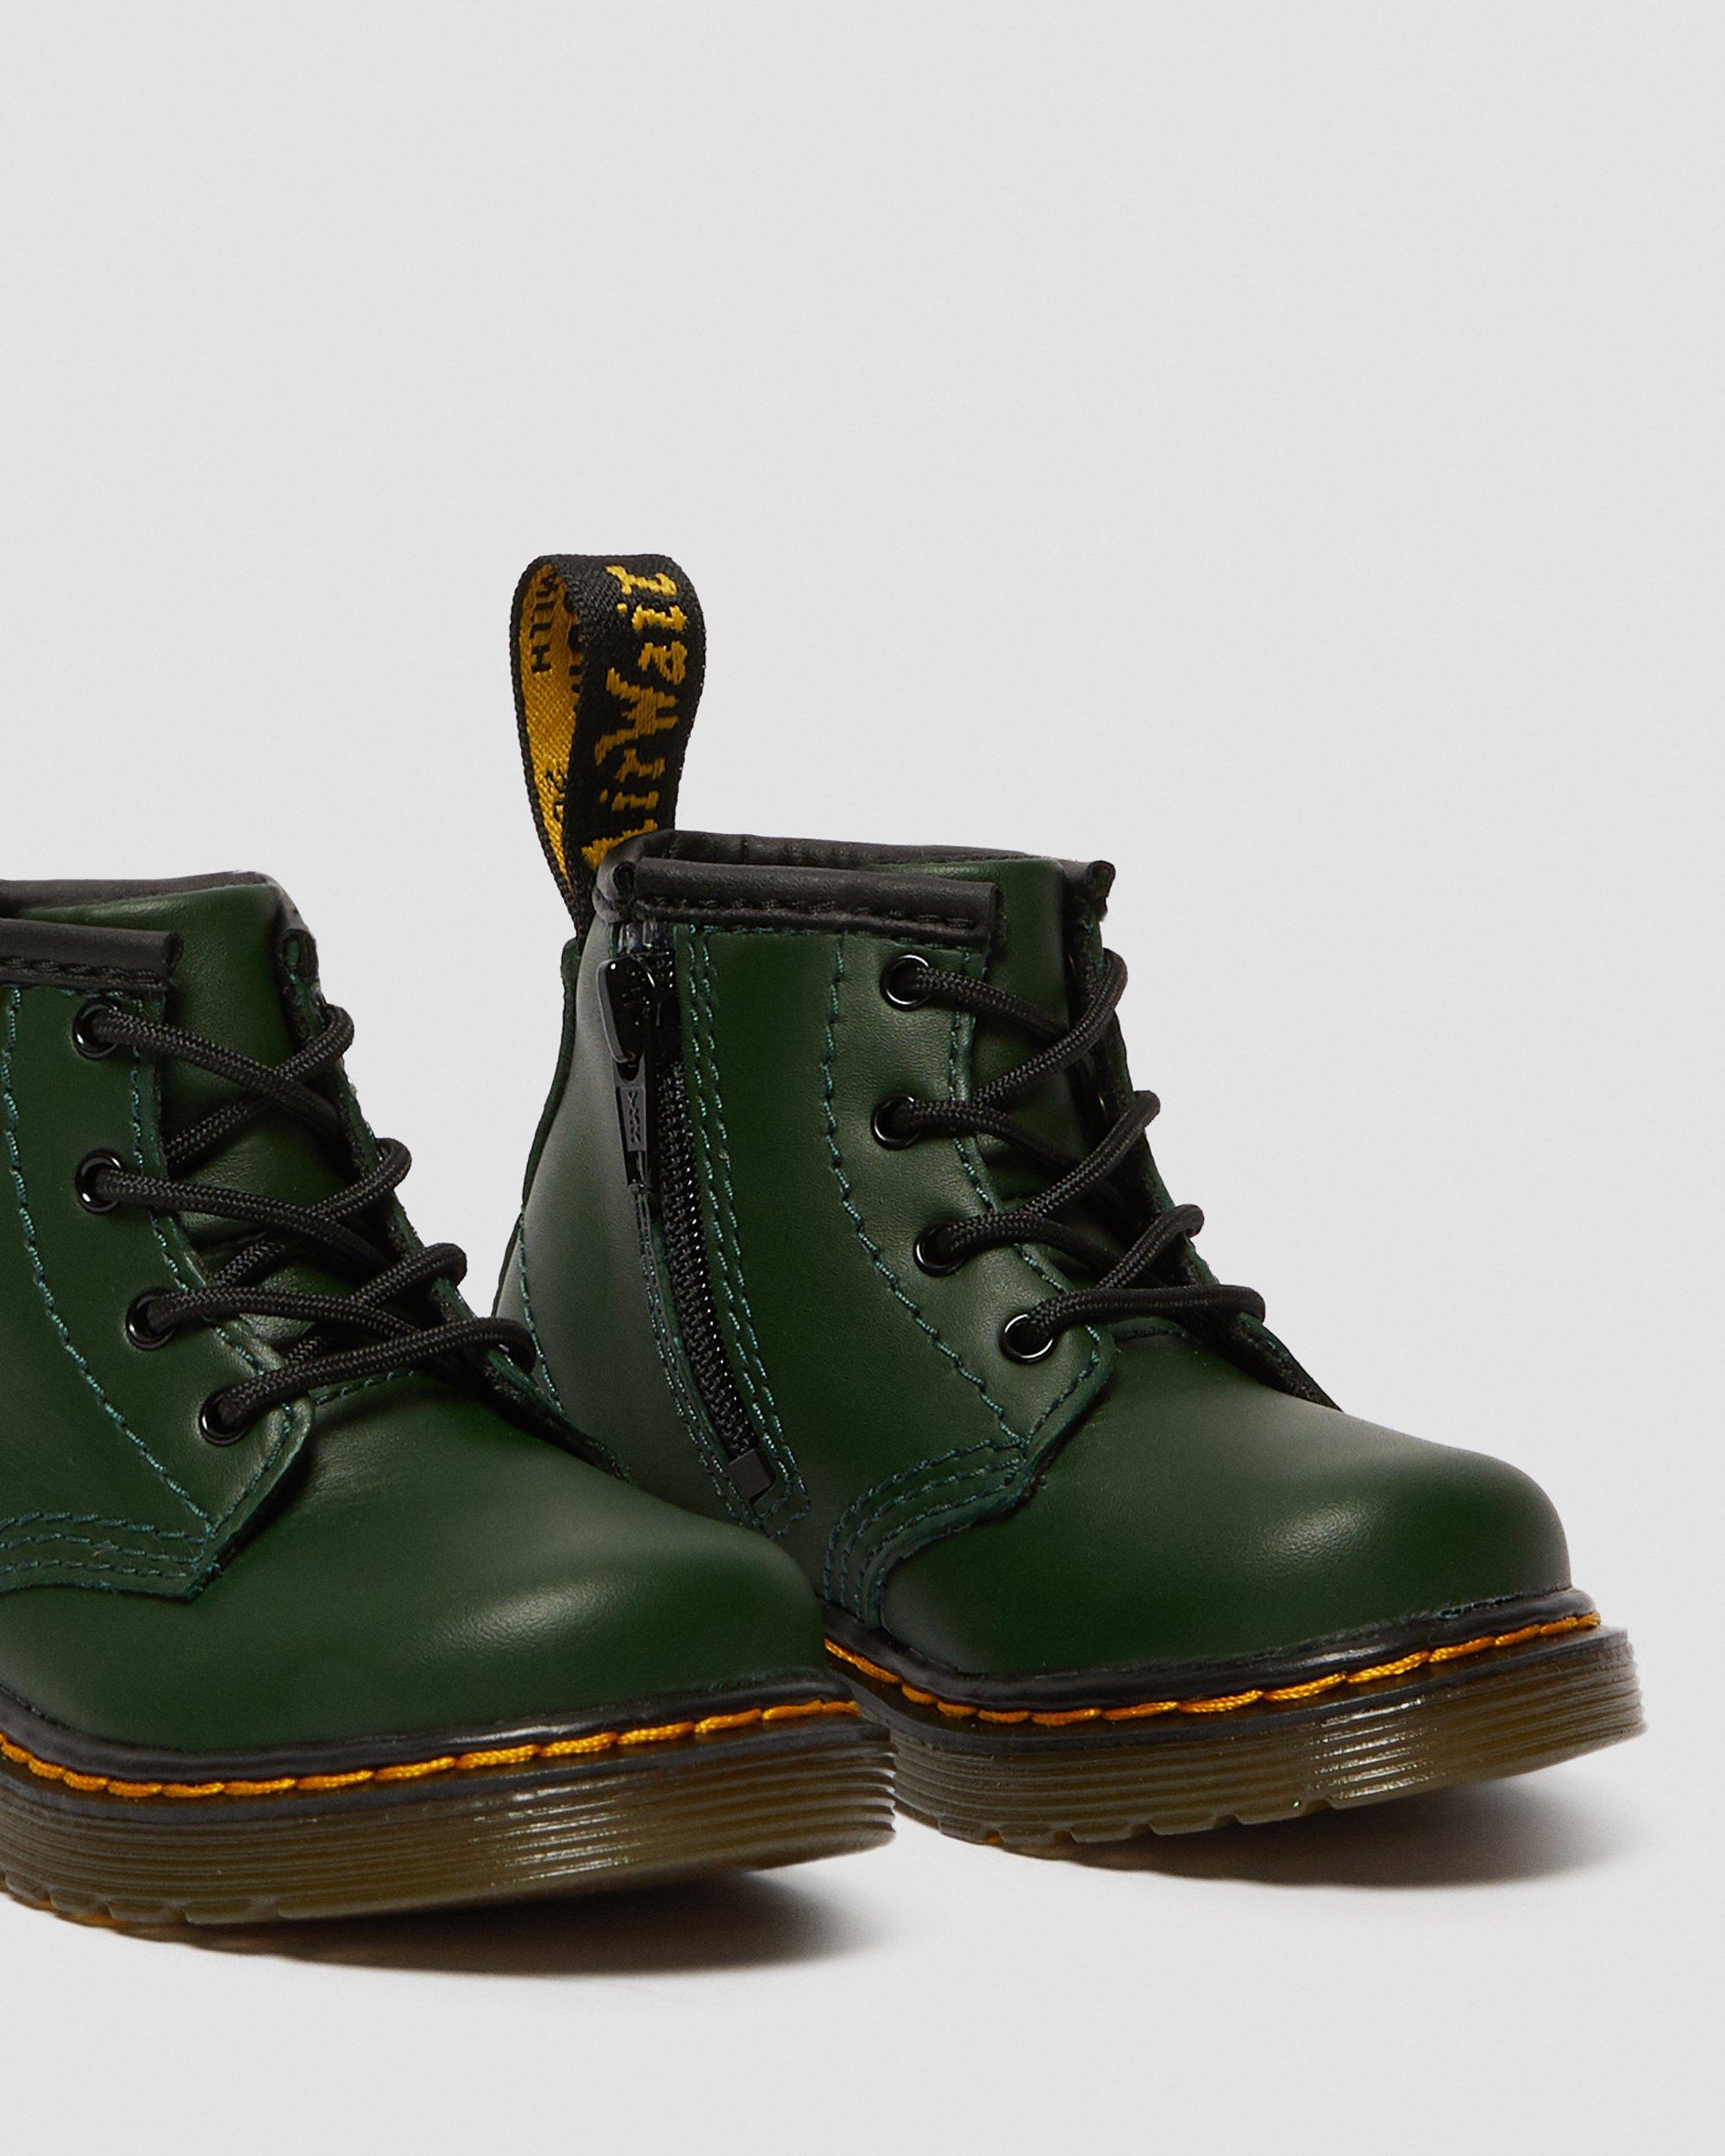 INFANT 1460 LEATHER ANKLE BOOTS | Dr. Martens